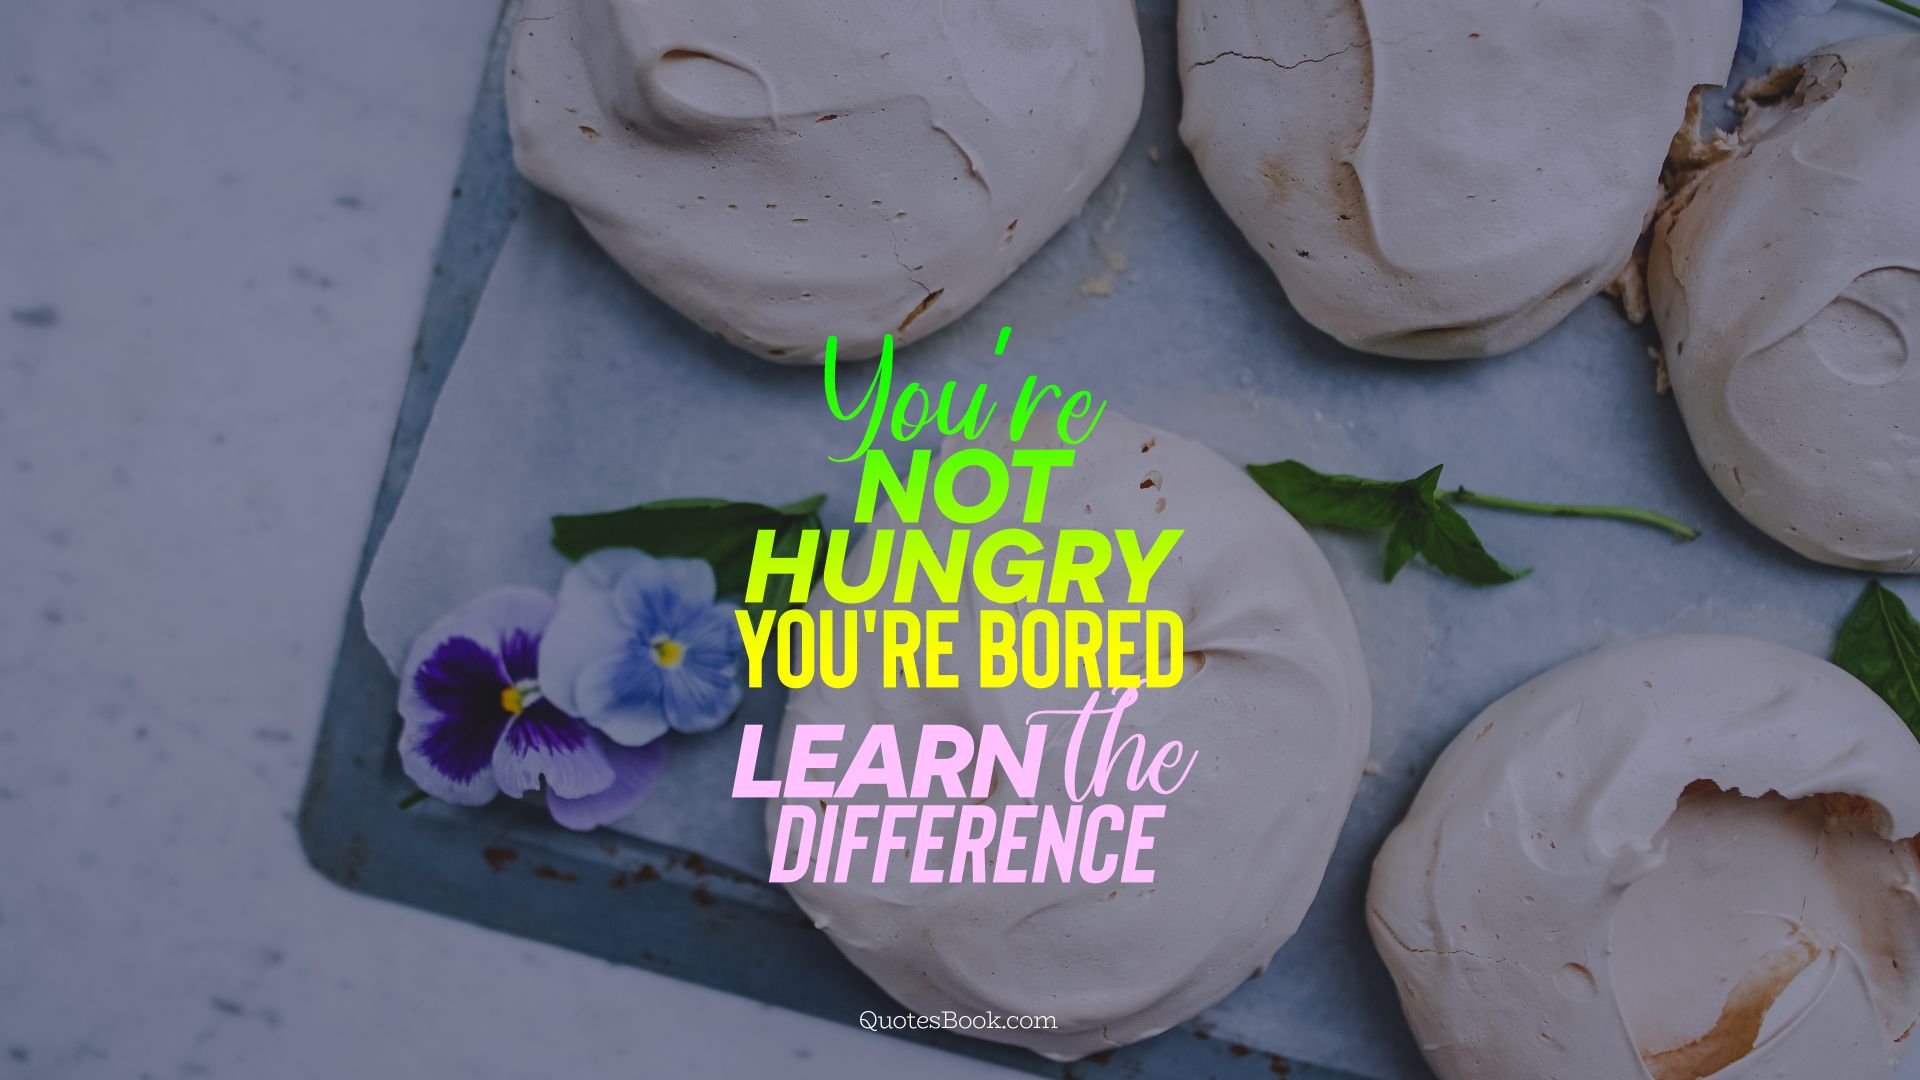 You're not hungry you're bored learn the difference